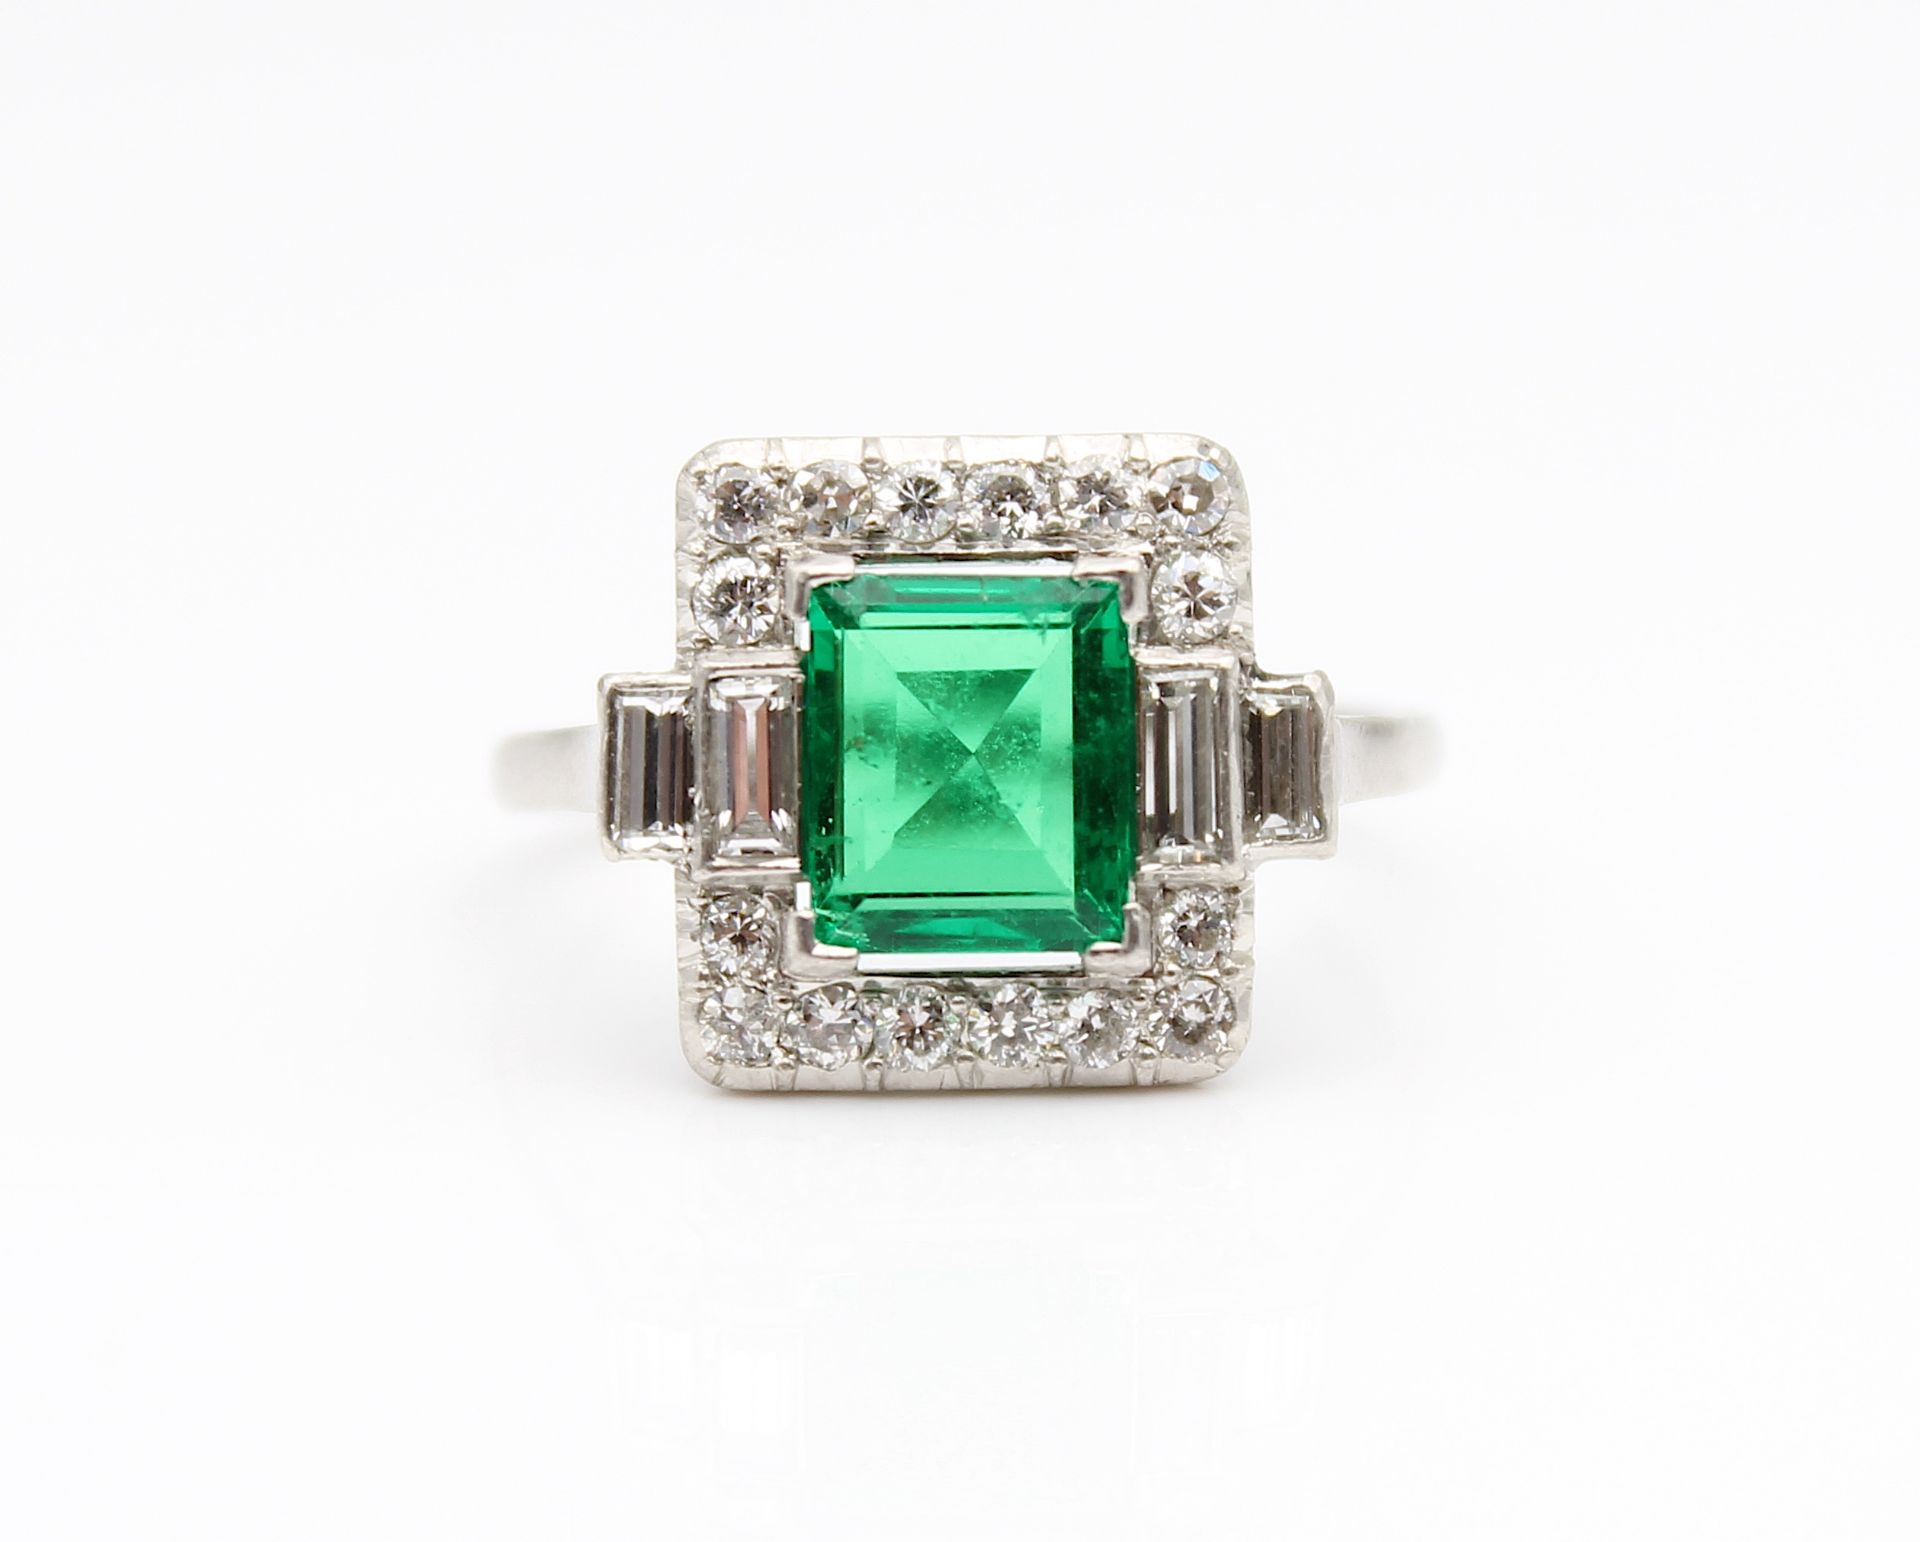 Platinum ring with an emerald and diamonds